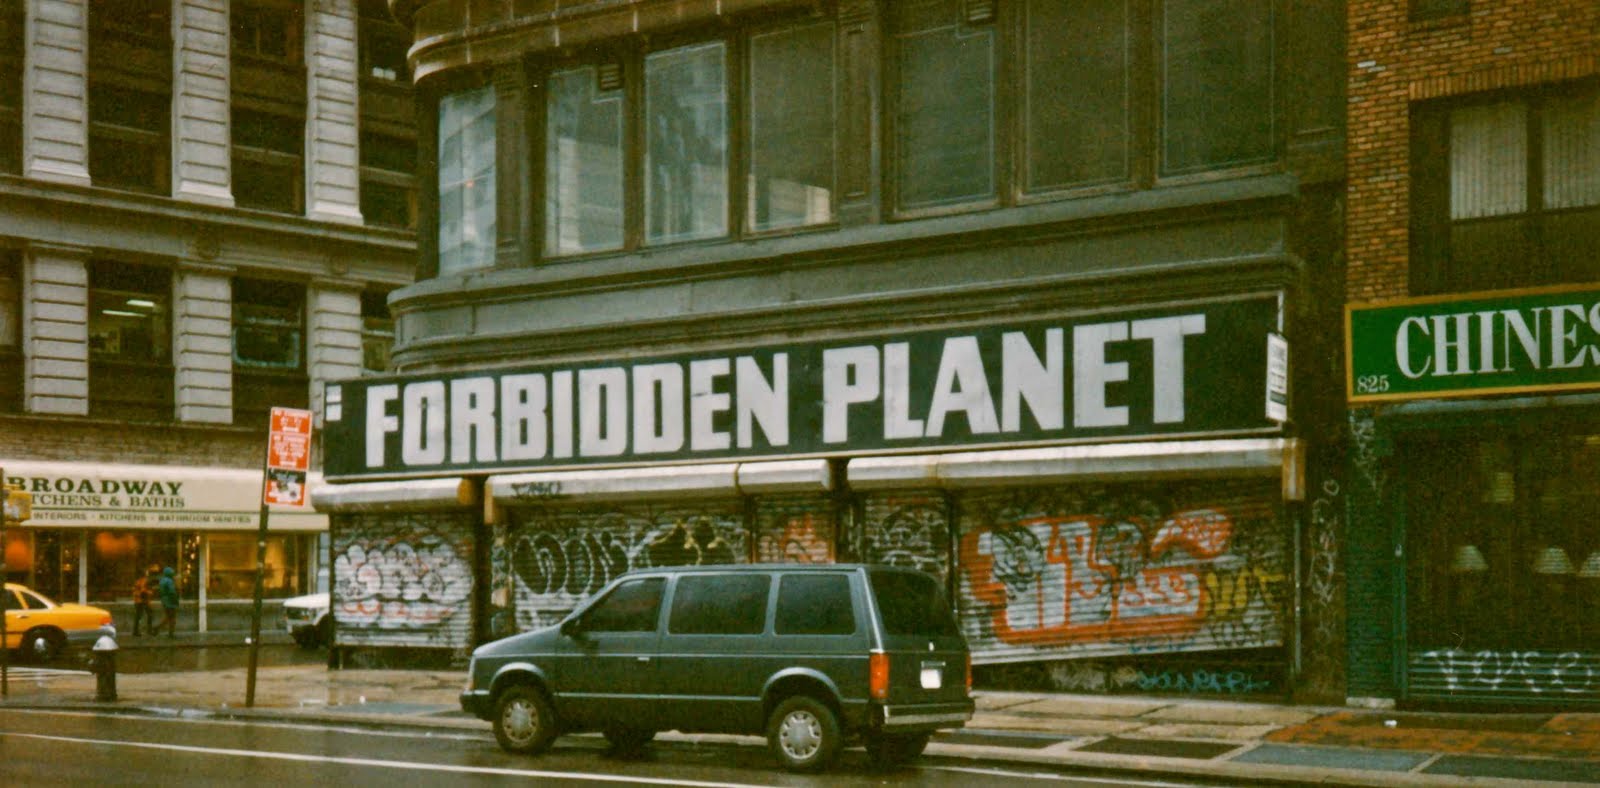 2020 Forbidden Planet Comic Book Store Open Again NYC 0188…